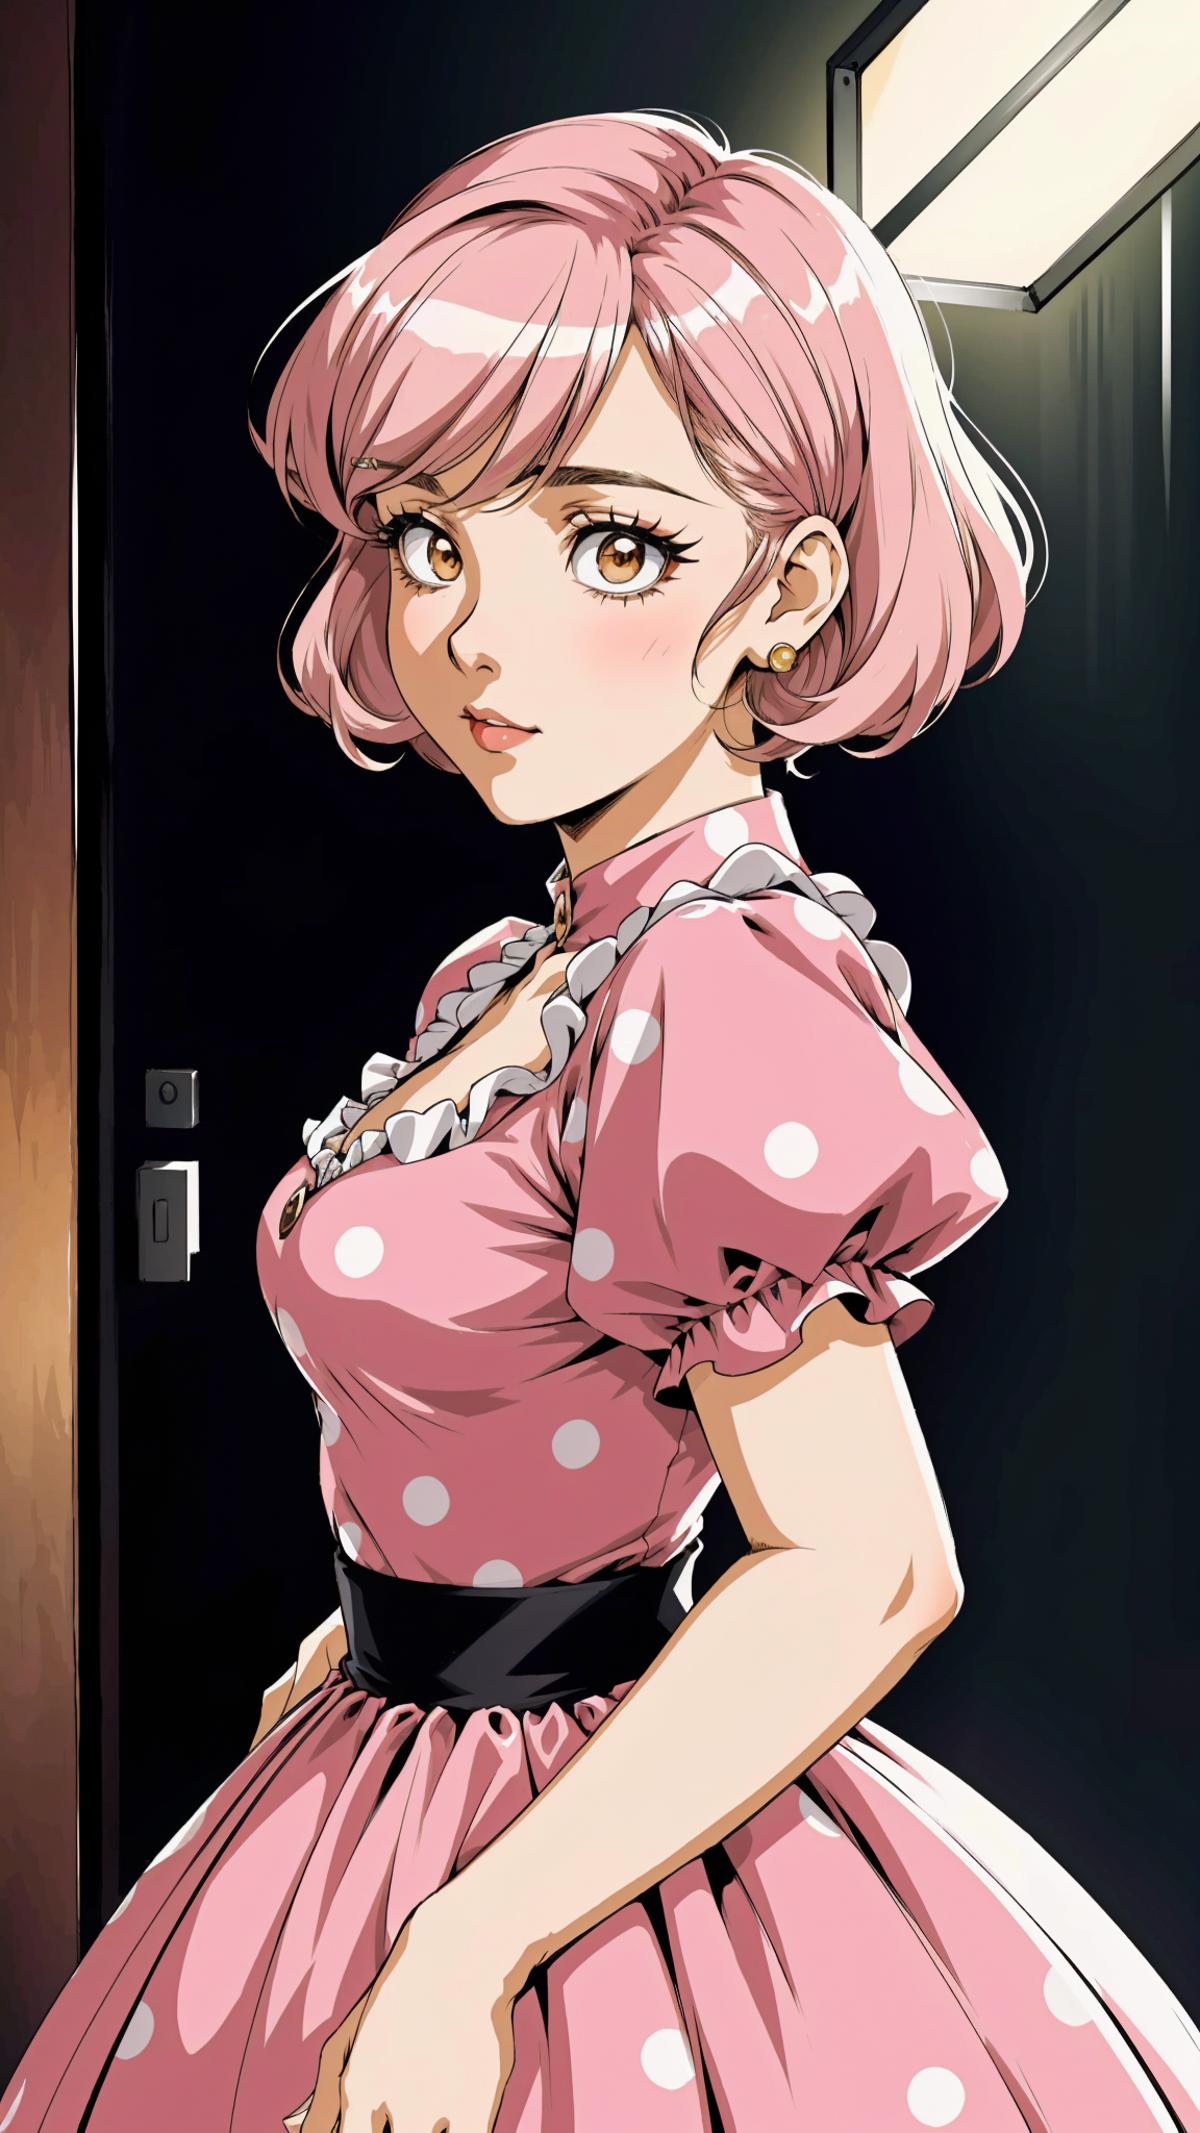 A pink haired woman in a polka dot dress and black panties standing in front of a door.